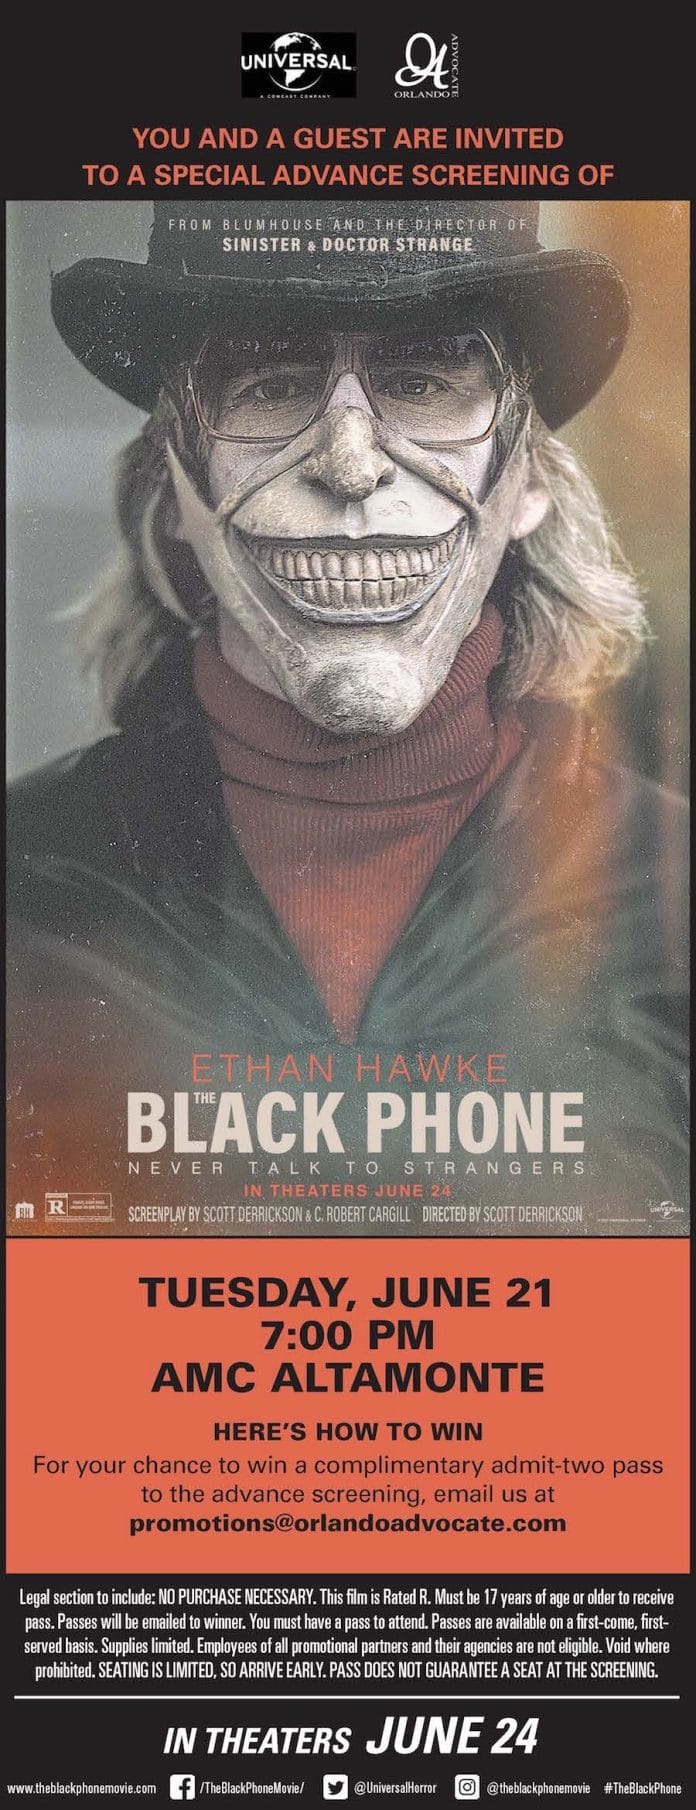 The Black Phone promotional ad